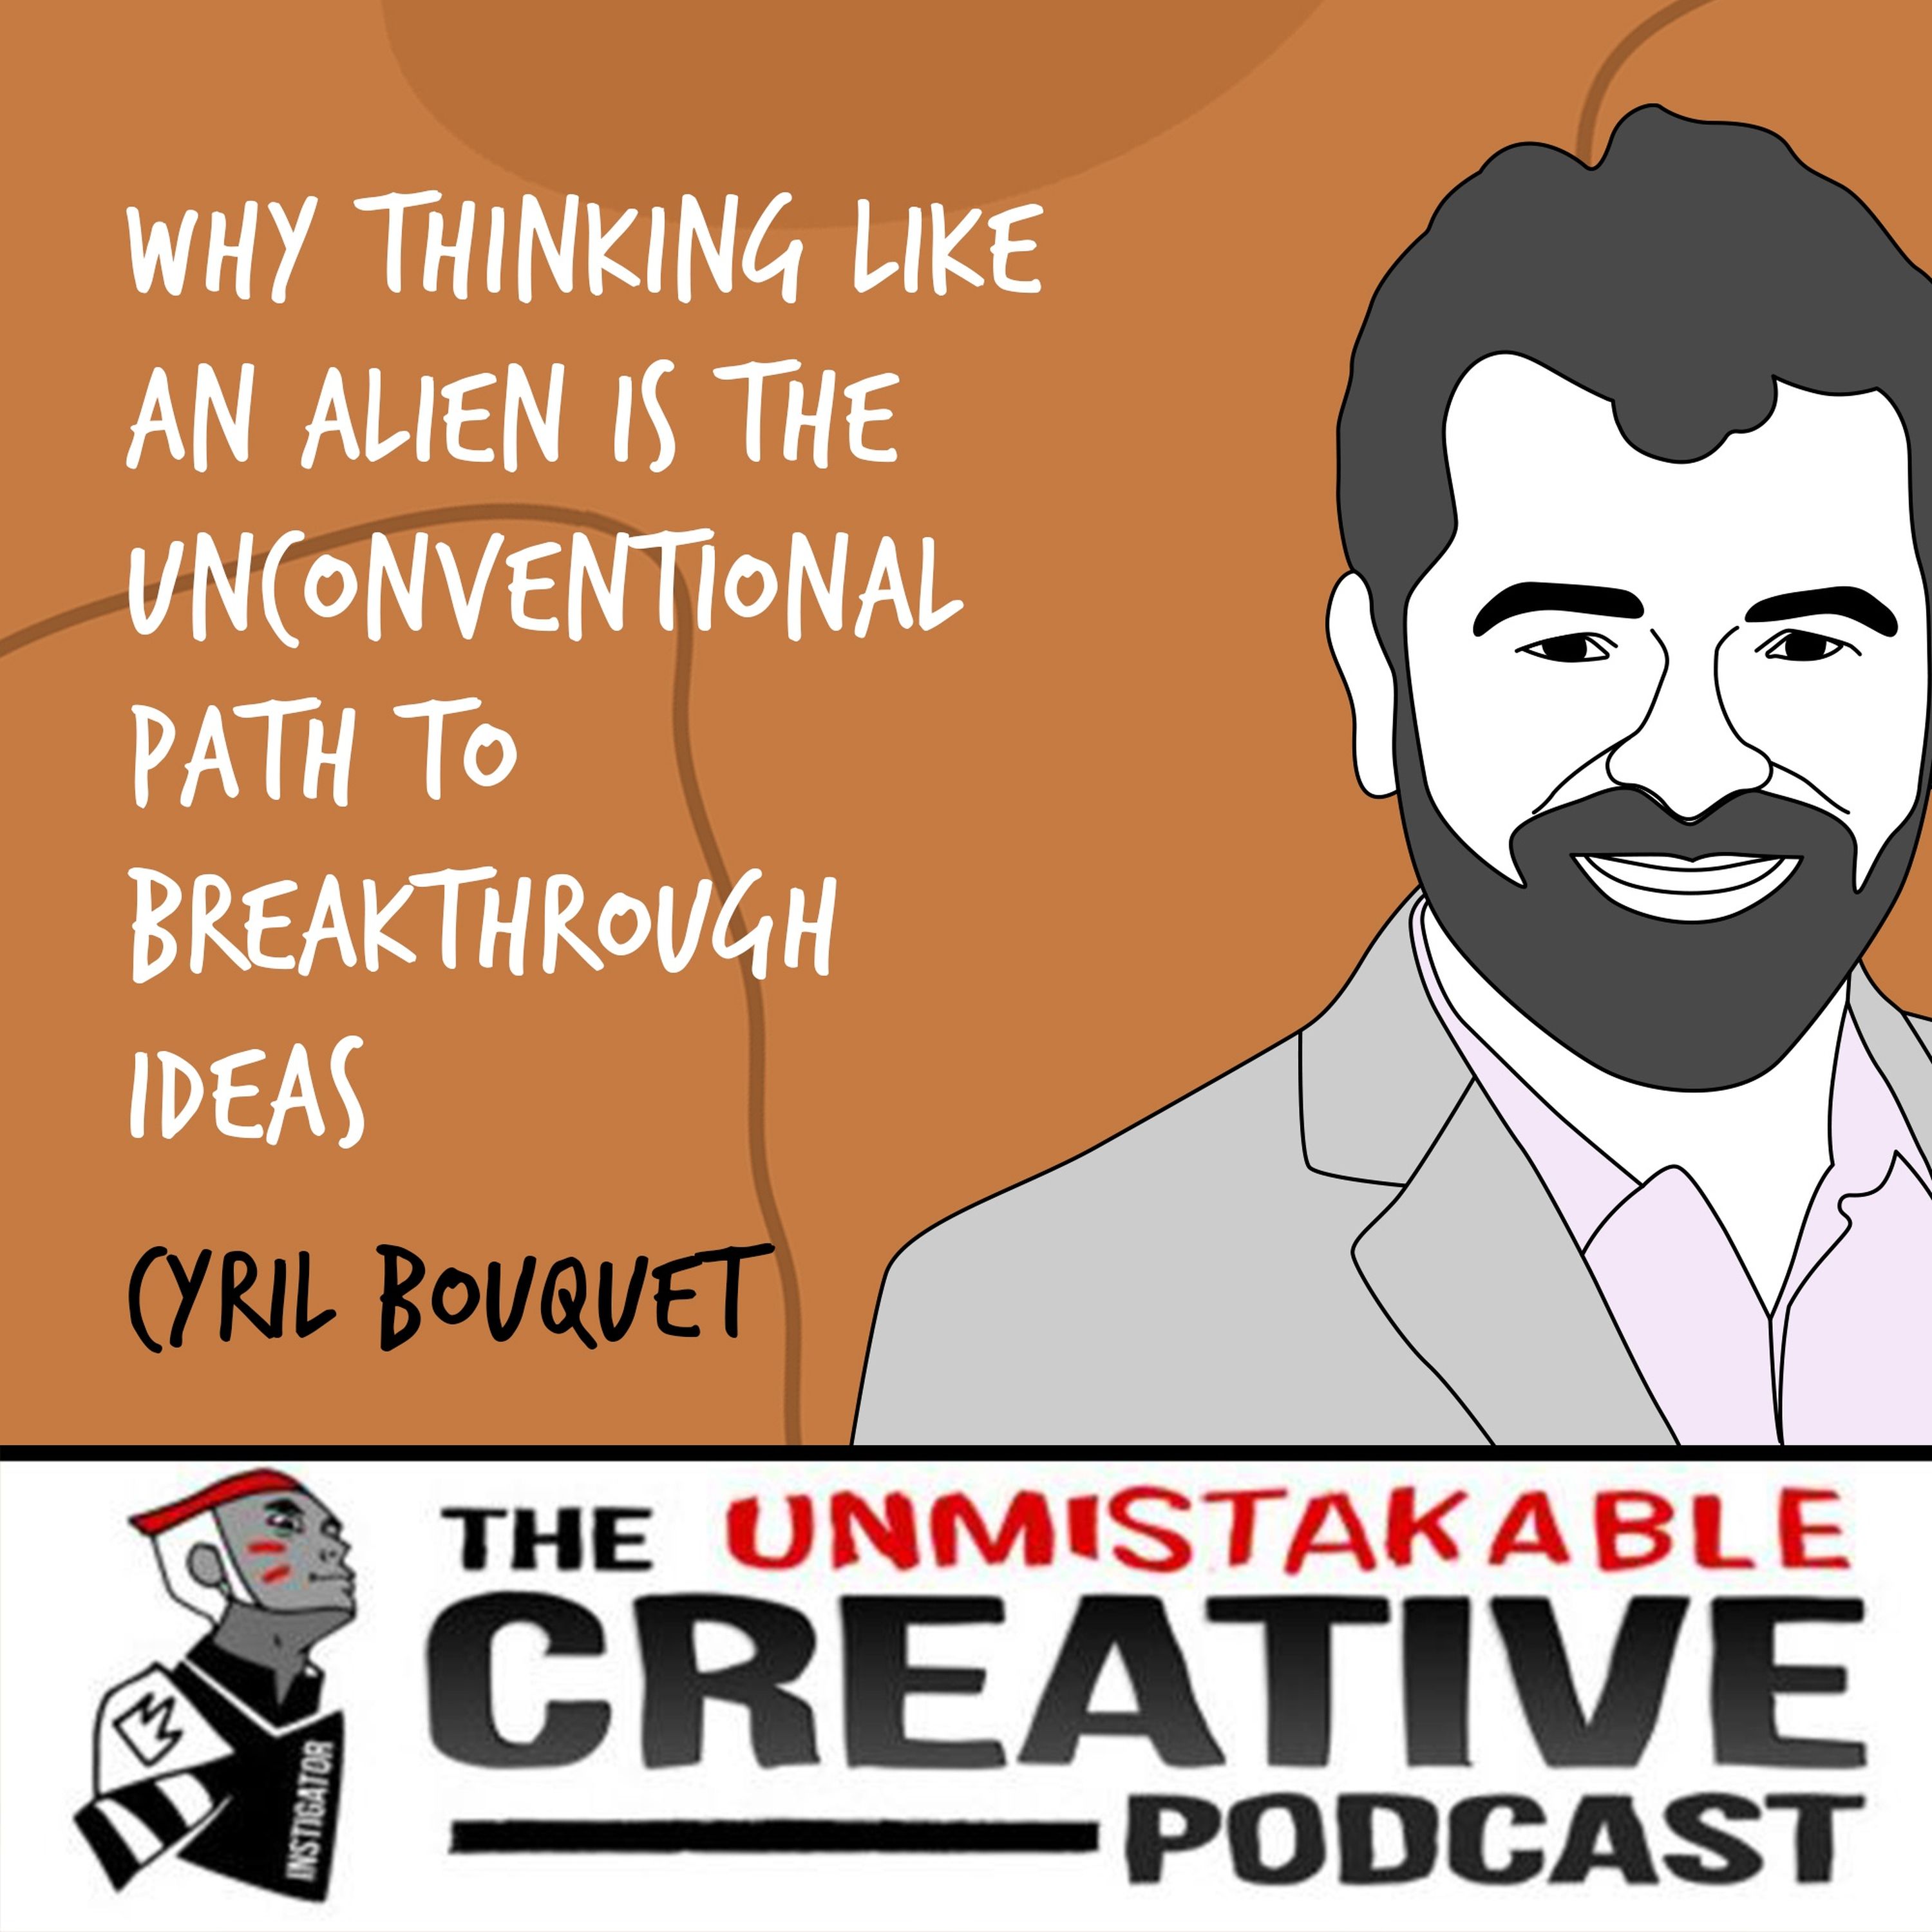 Cyril Bouquet | Why Thinking Like An Alien is the Unconventional Path to Breakthrough Ideas Image